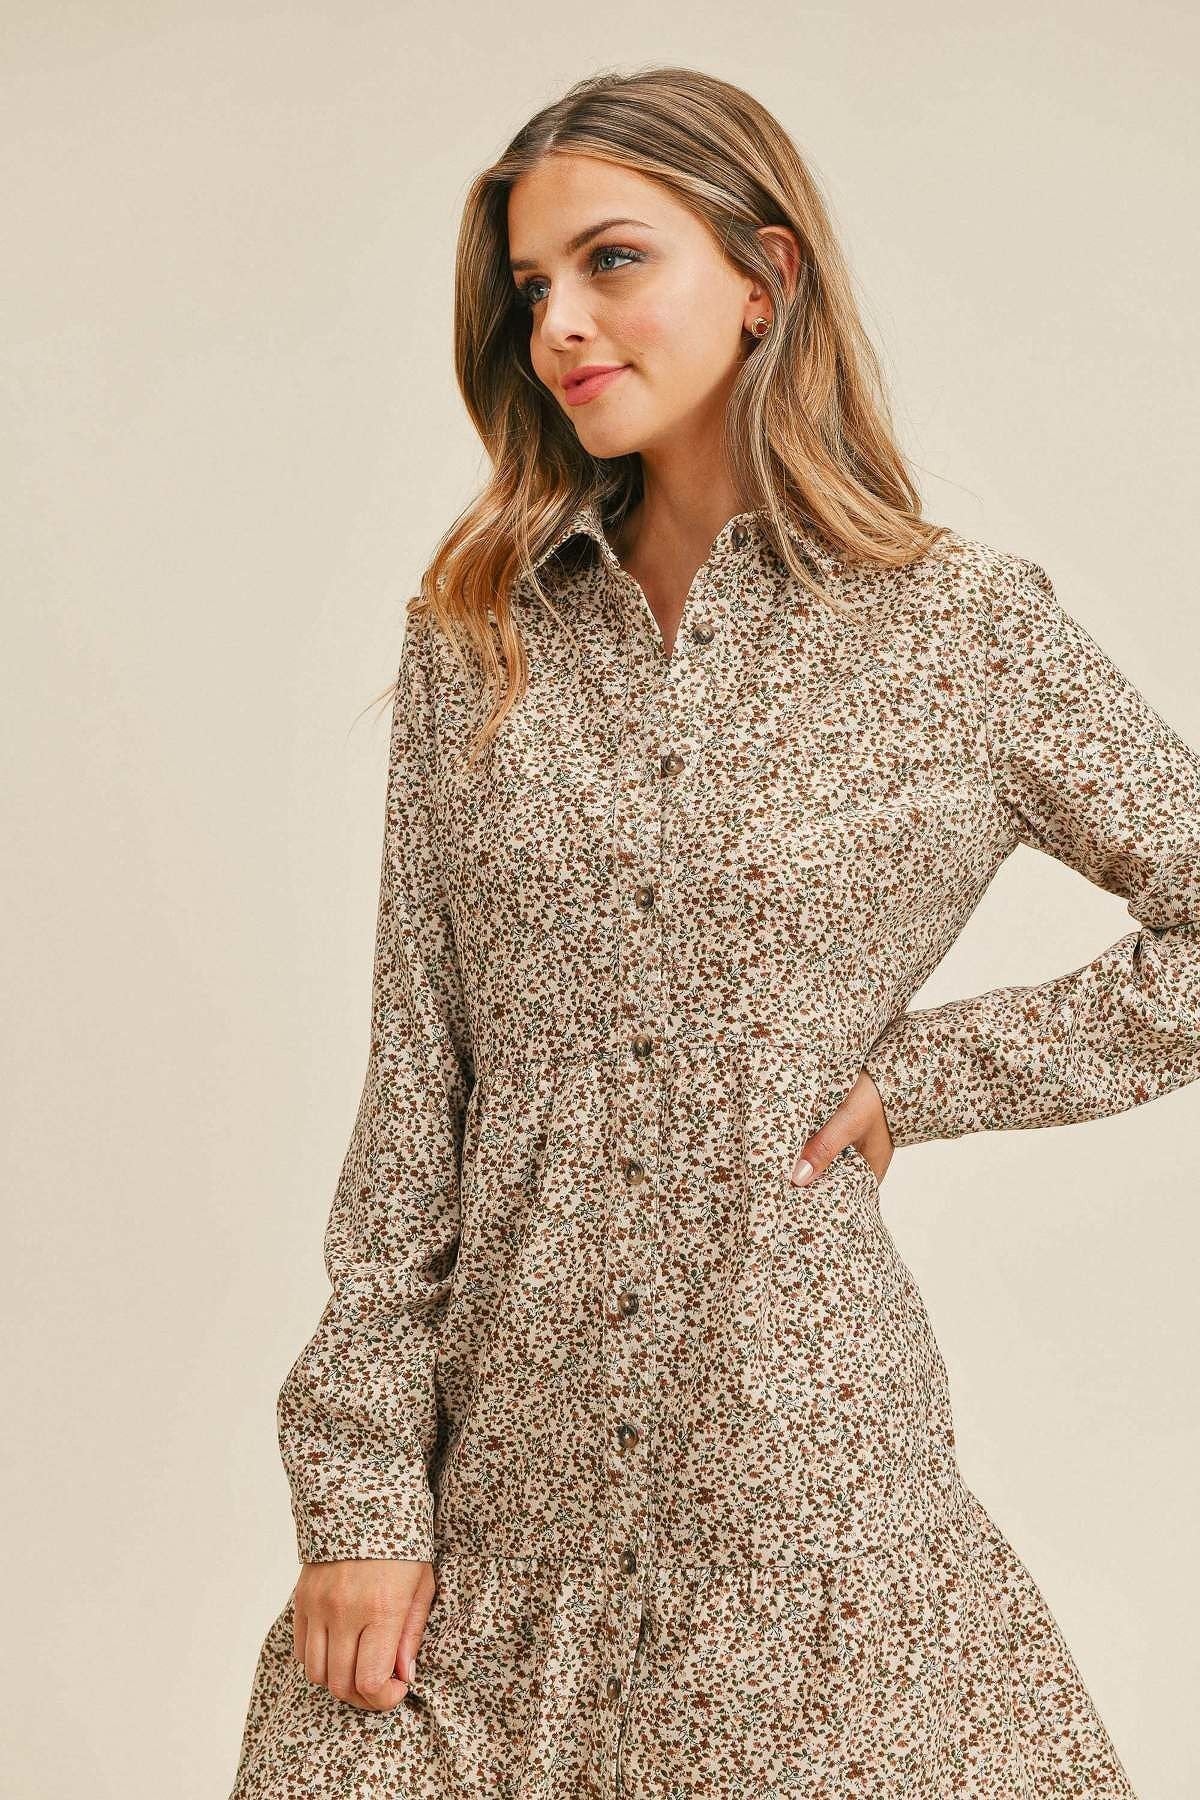 Corduroy Printed Button Down Front Collar Long Sleeve Dress_ Dresses jehouze 